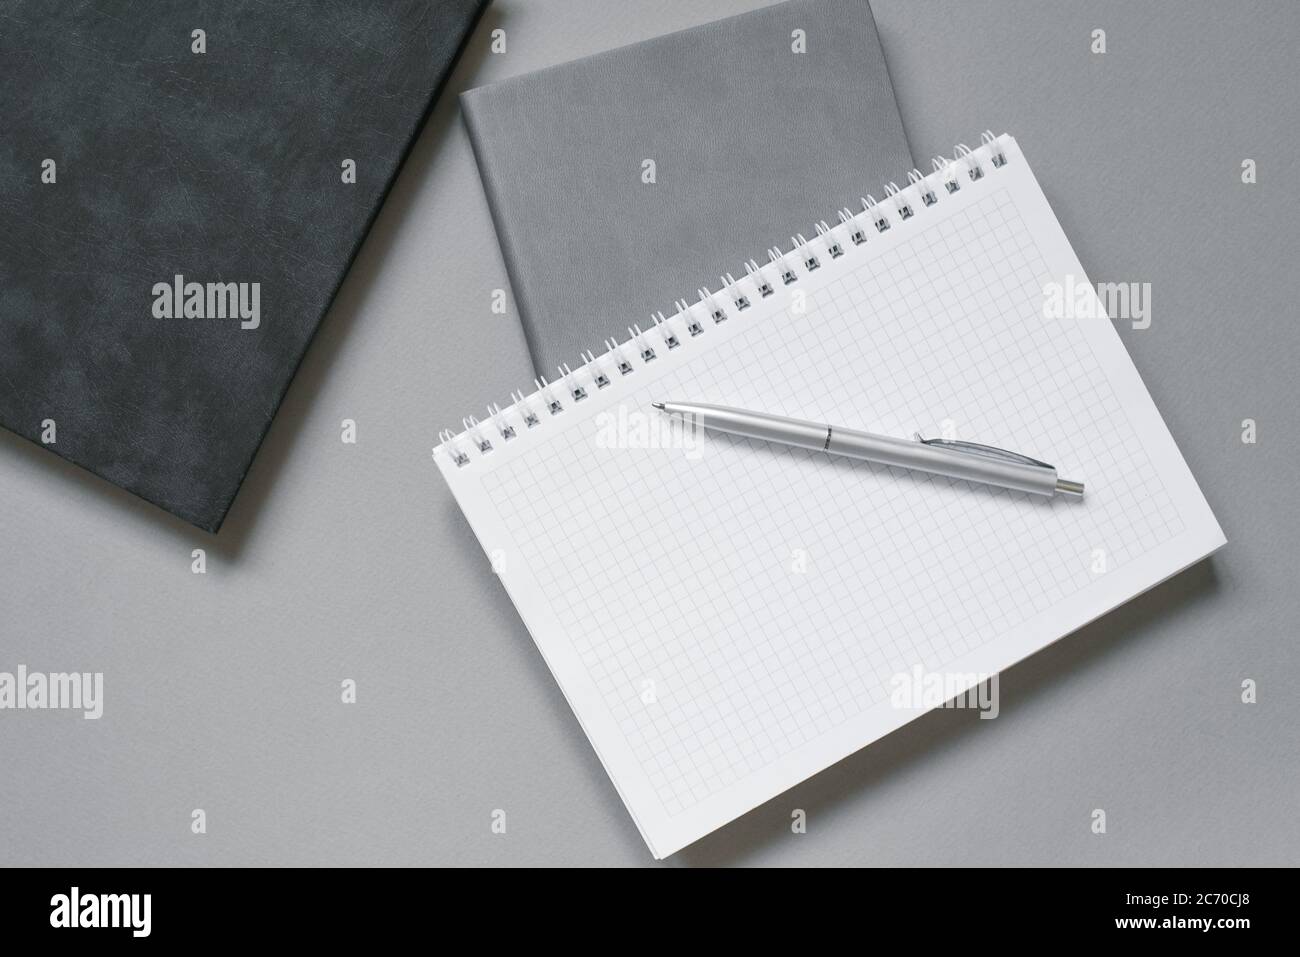 Notebooks or diaries with a blank page and a ballpoint pen on top of them. Office worker's place Stock Photo